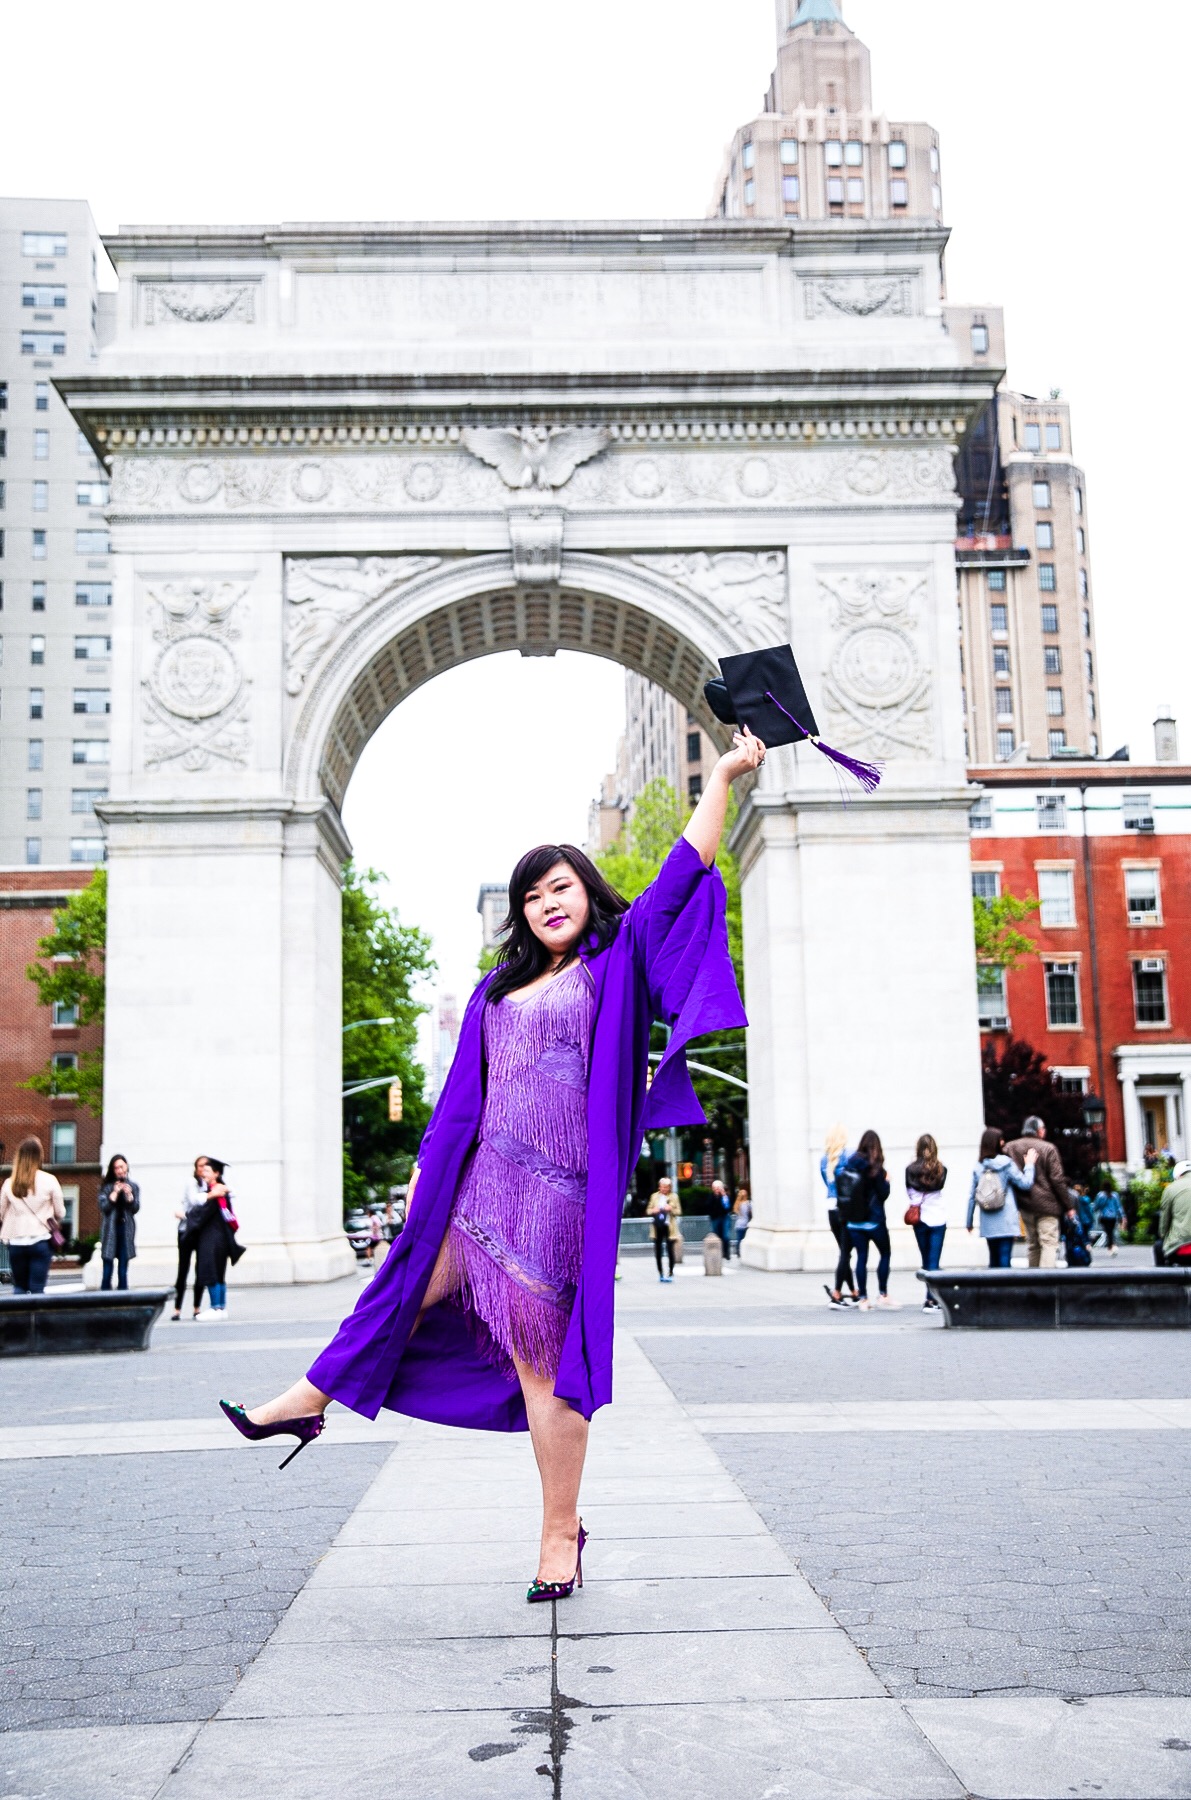 Looking for the perfect graduation dress?